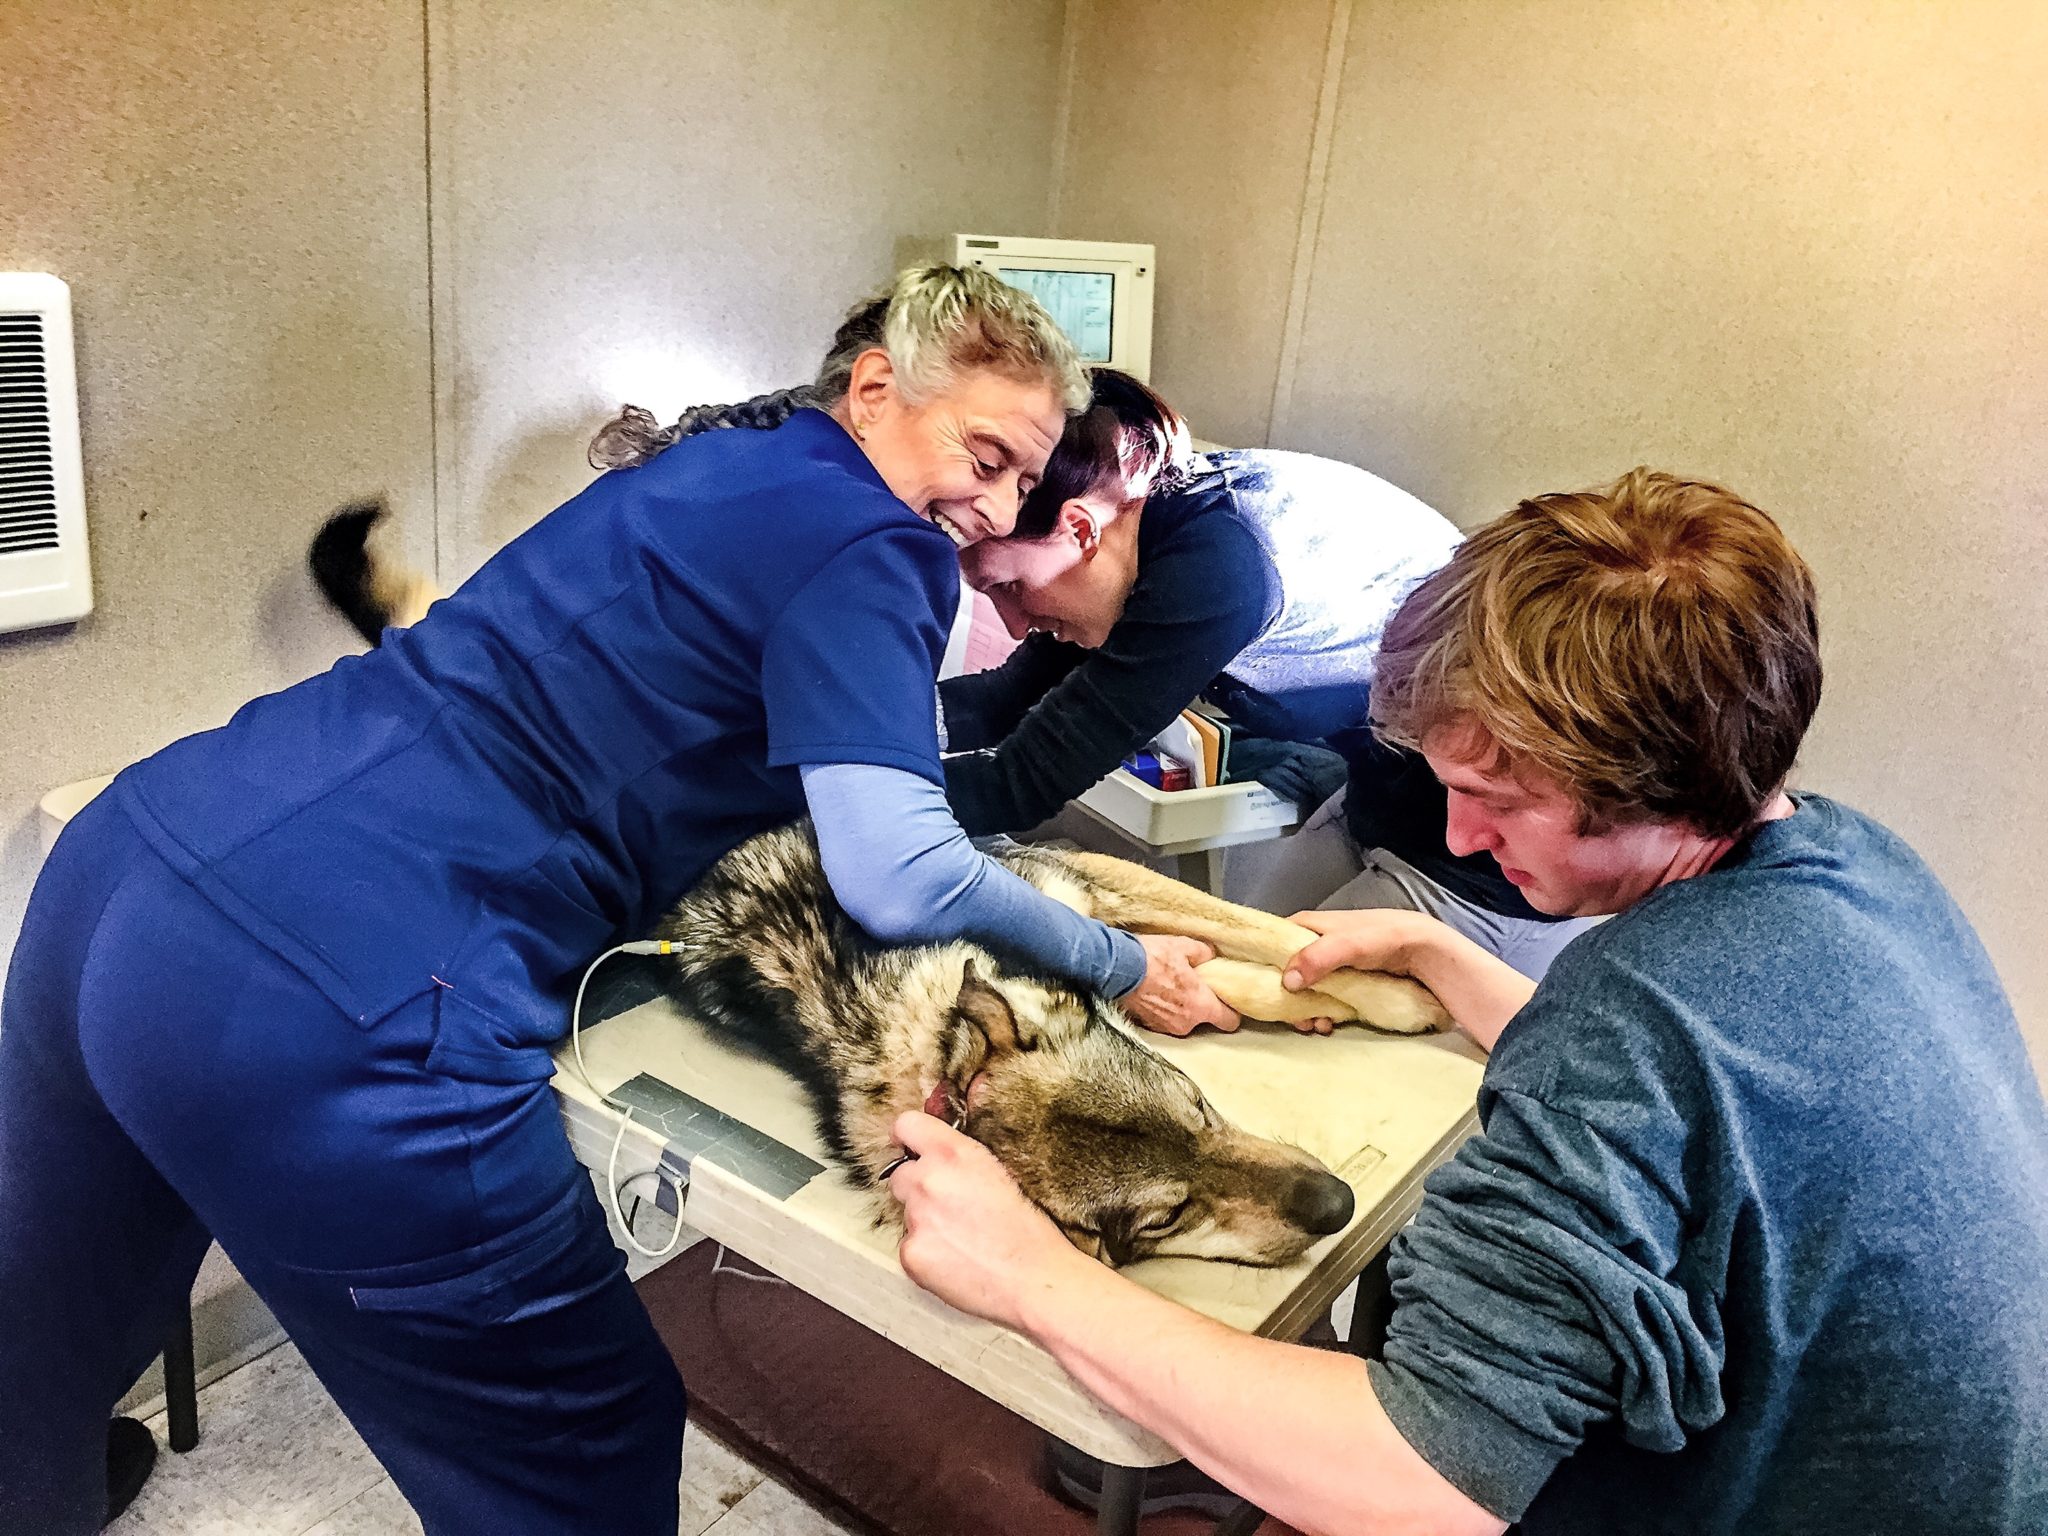 Iditarod gives ECGs as a part of its dog care program